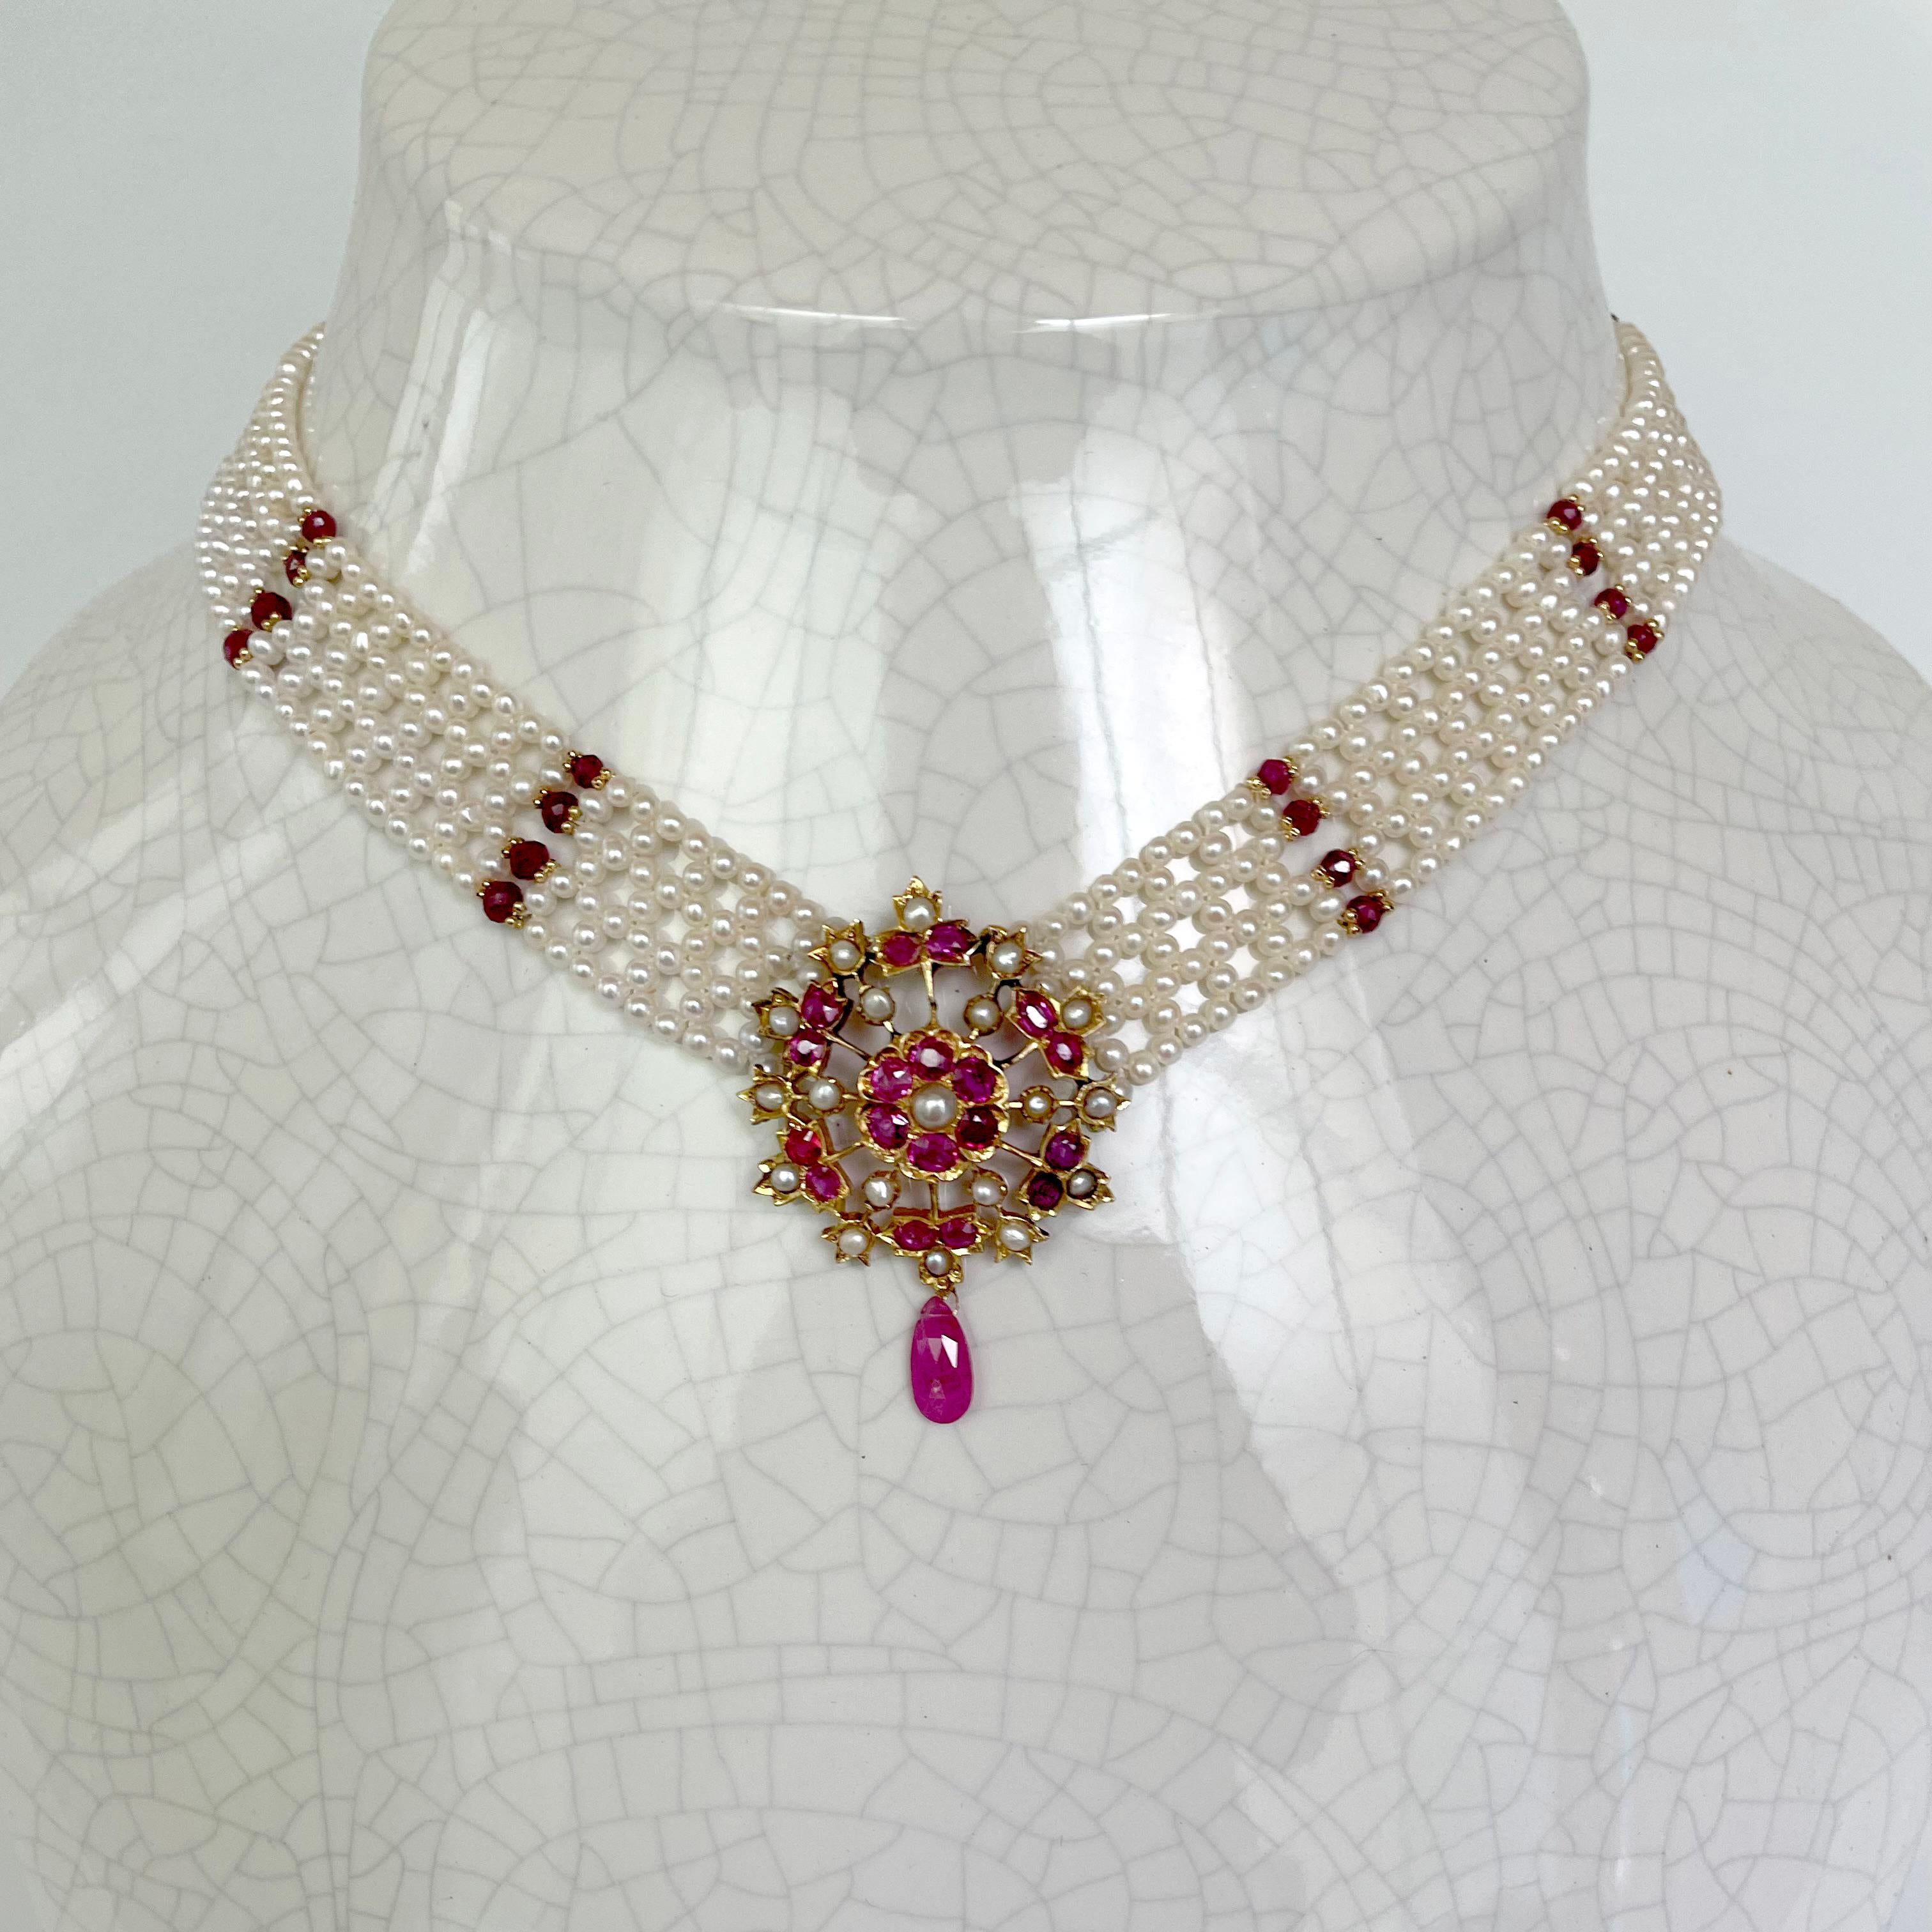 Briolette Cut Marina J One of a Kind Pearl and Ruby Necklace with Antique 18k Gold Centerpiece